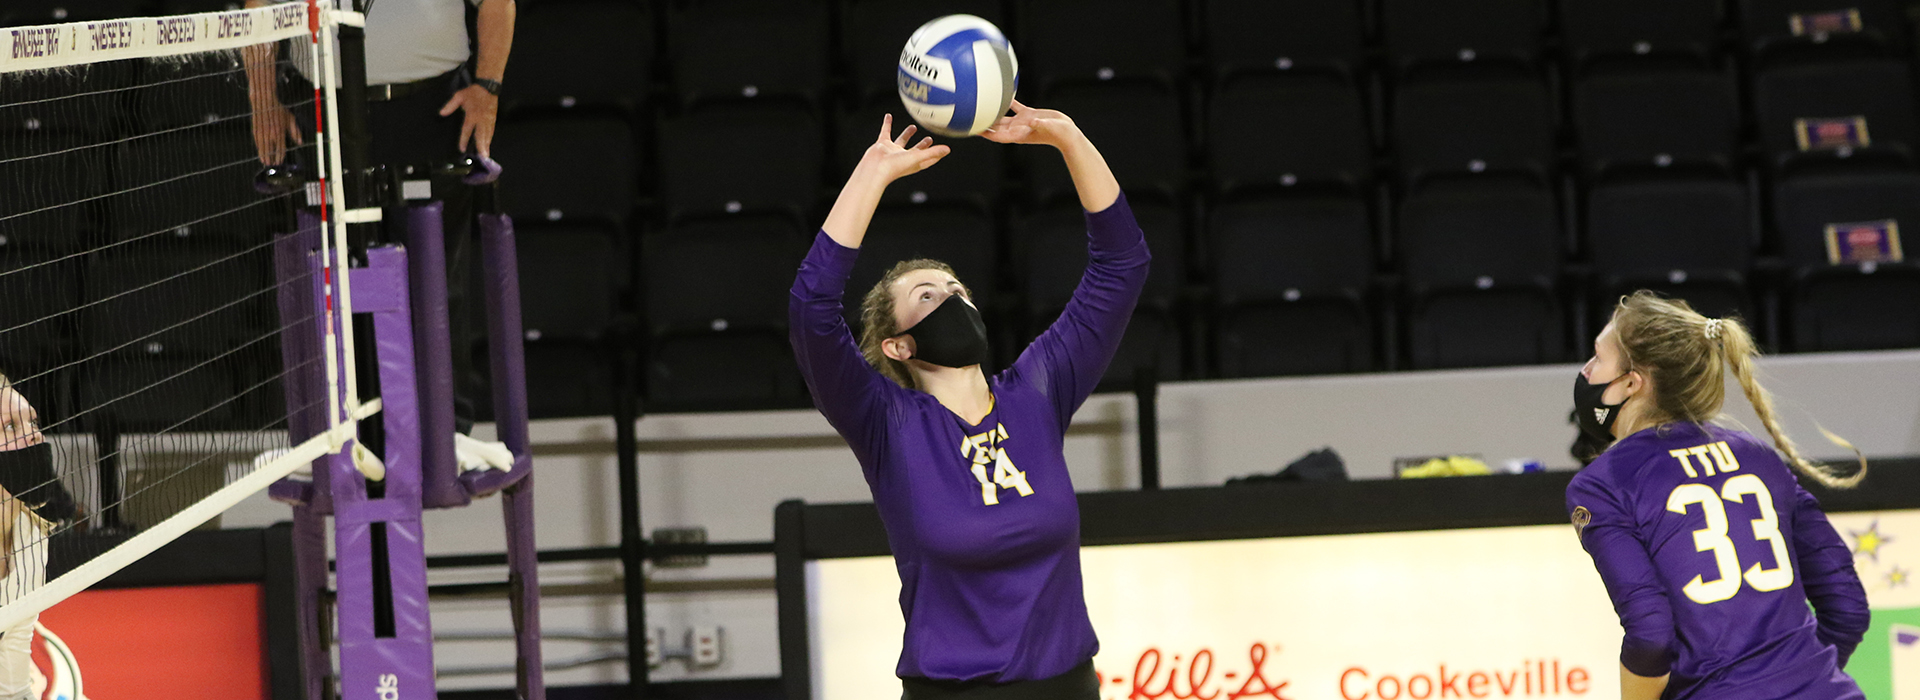 Tech volleyball team travels south for pair of tilts at undefeated Jacksonville State